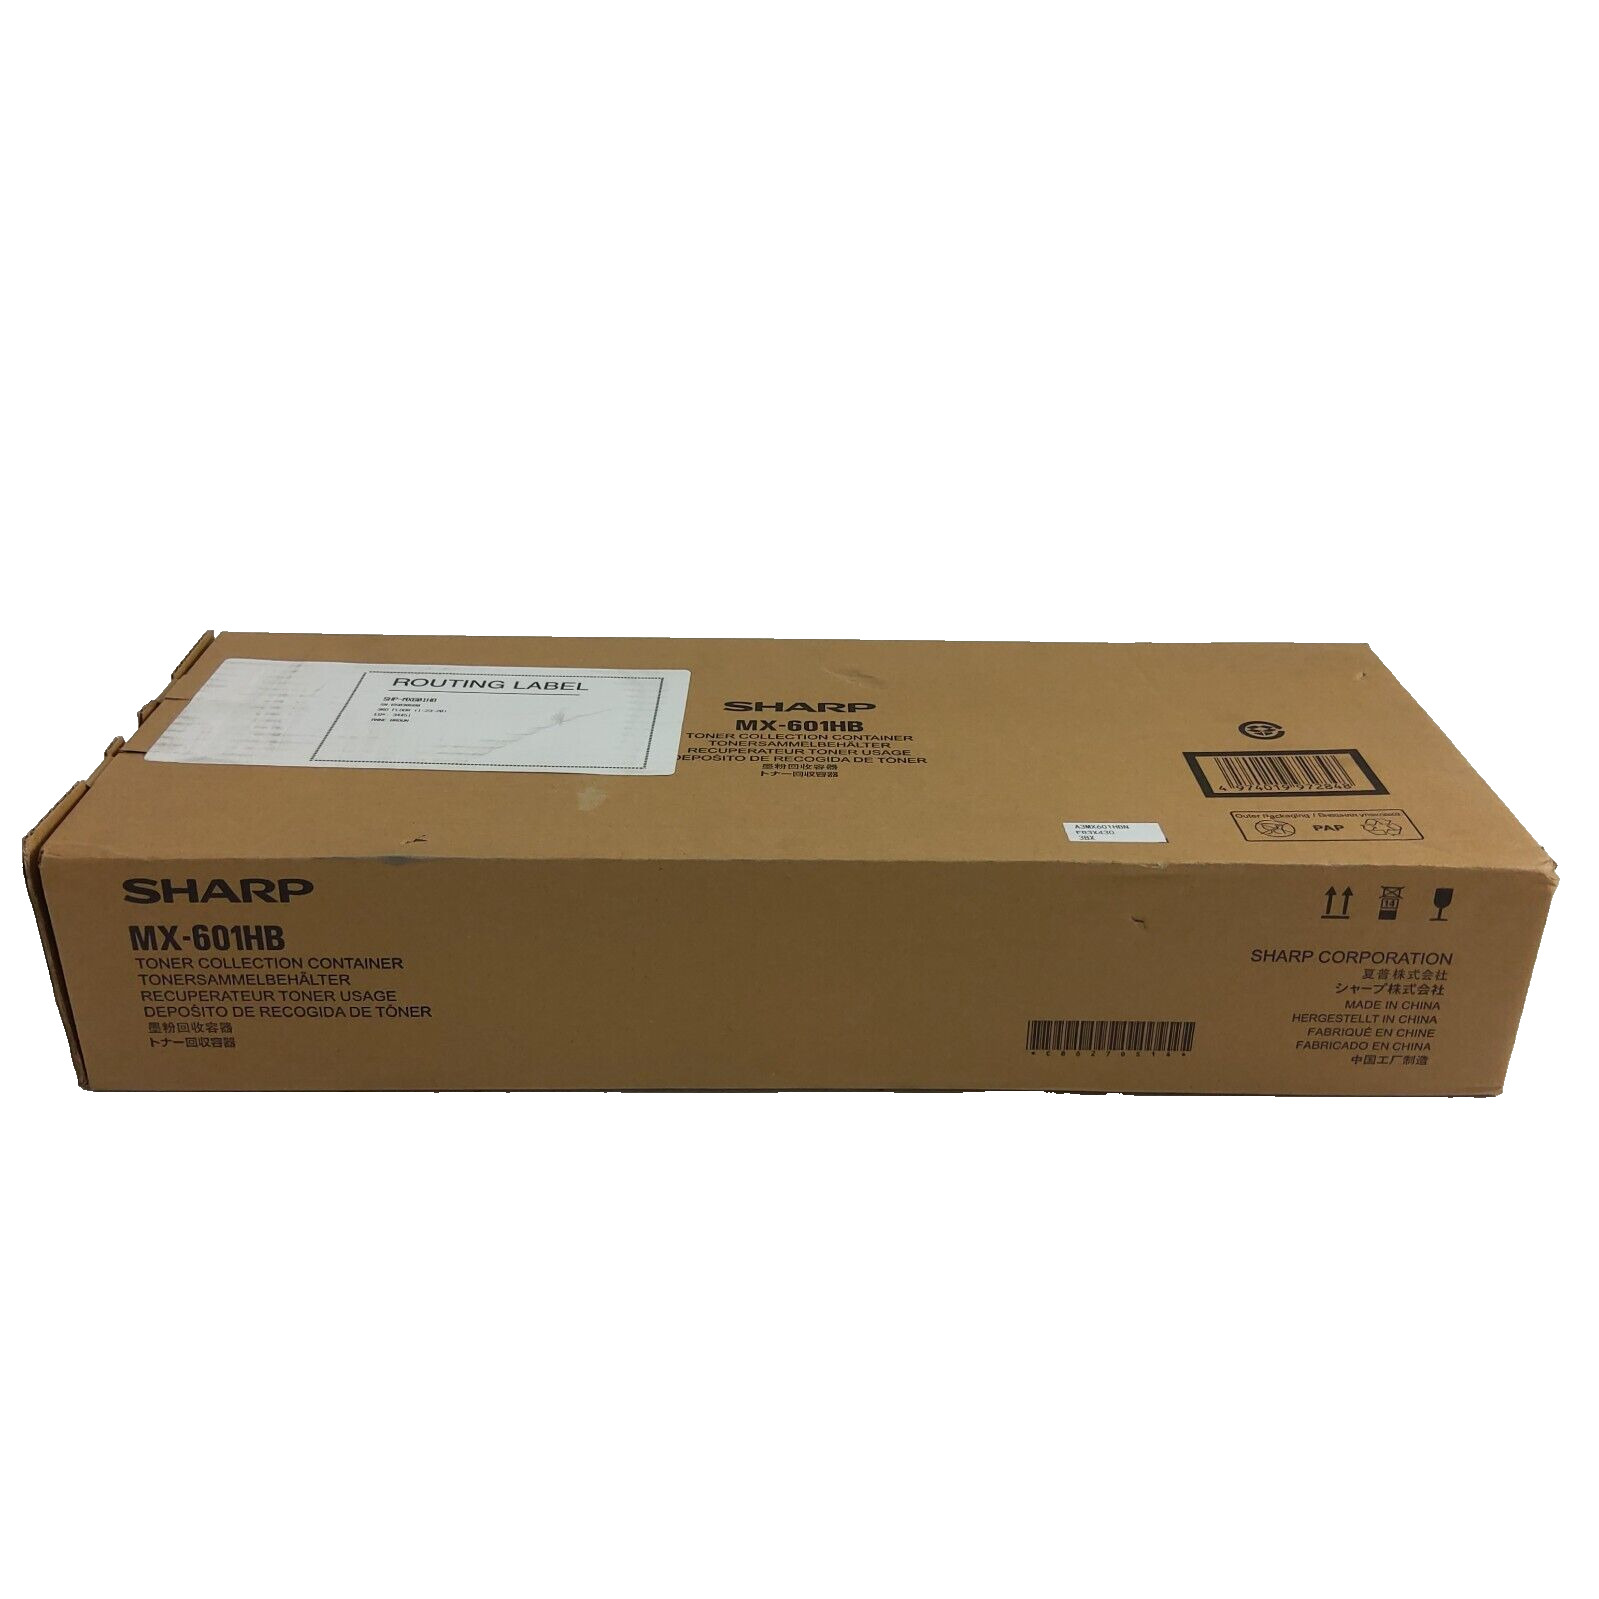 New Genuine OEM MX-601HB Sharp Toner Collection Container